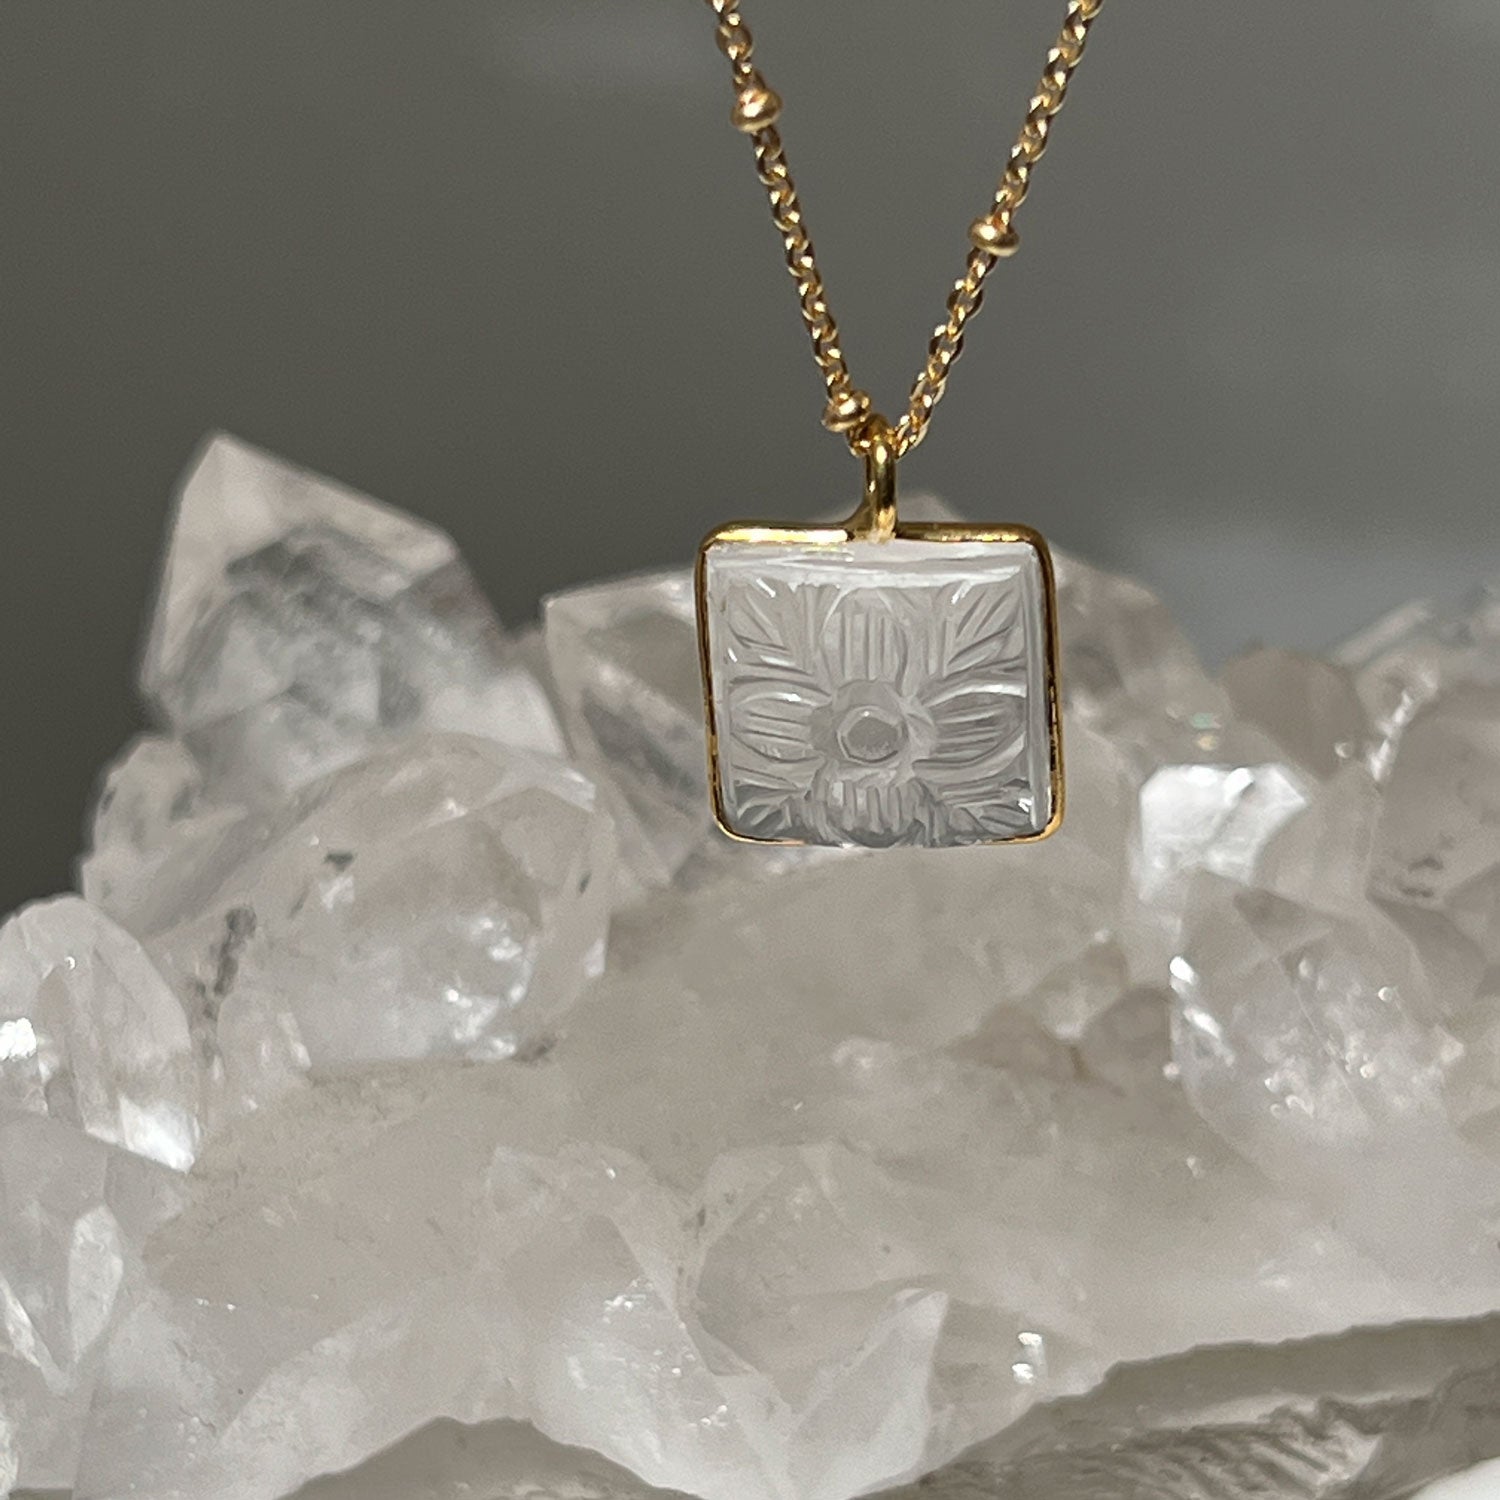 Carved Square Rock Crystal Pendant on Short Satellite Chain